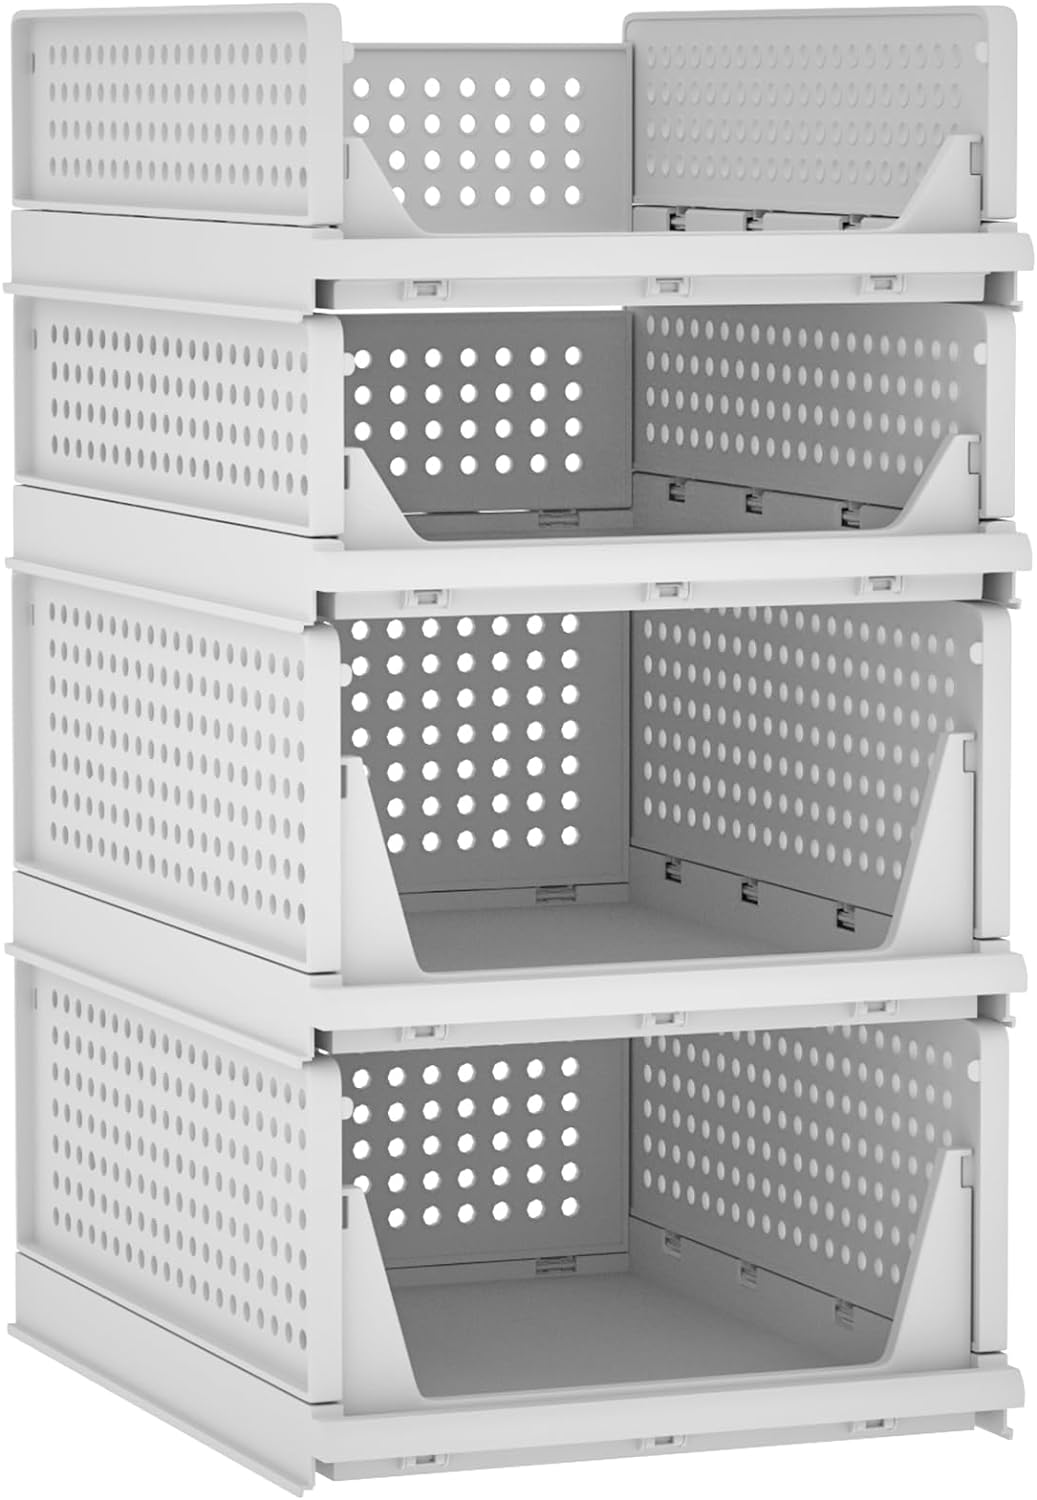 Homde Stackable Closet Organizers and Storage Bins, Foldable Plastic Storage Box Basket for Clothing, Clothes Organizer T-Shirt Storage Containers Kid Toy Food Rack for Wardrobe (4 Pack White-2S2L)